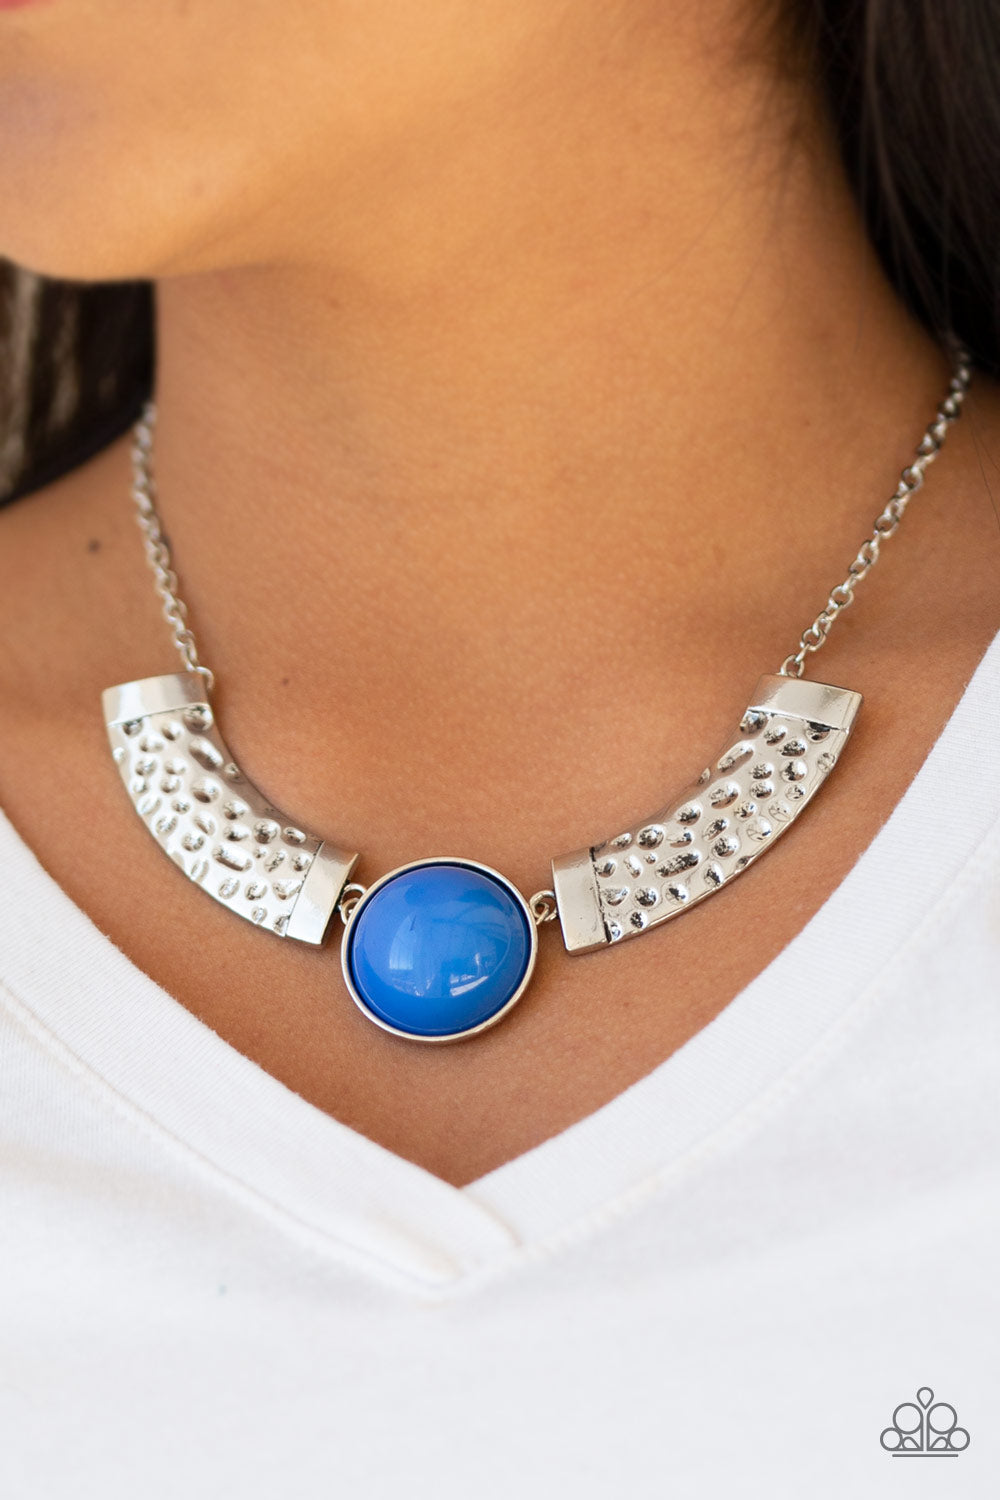 Paparazzi Jewelry & Accessories - Egyptian Spell - Blue Necklace. Bling By Titia Boutique